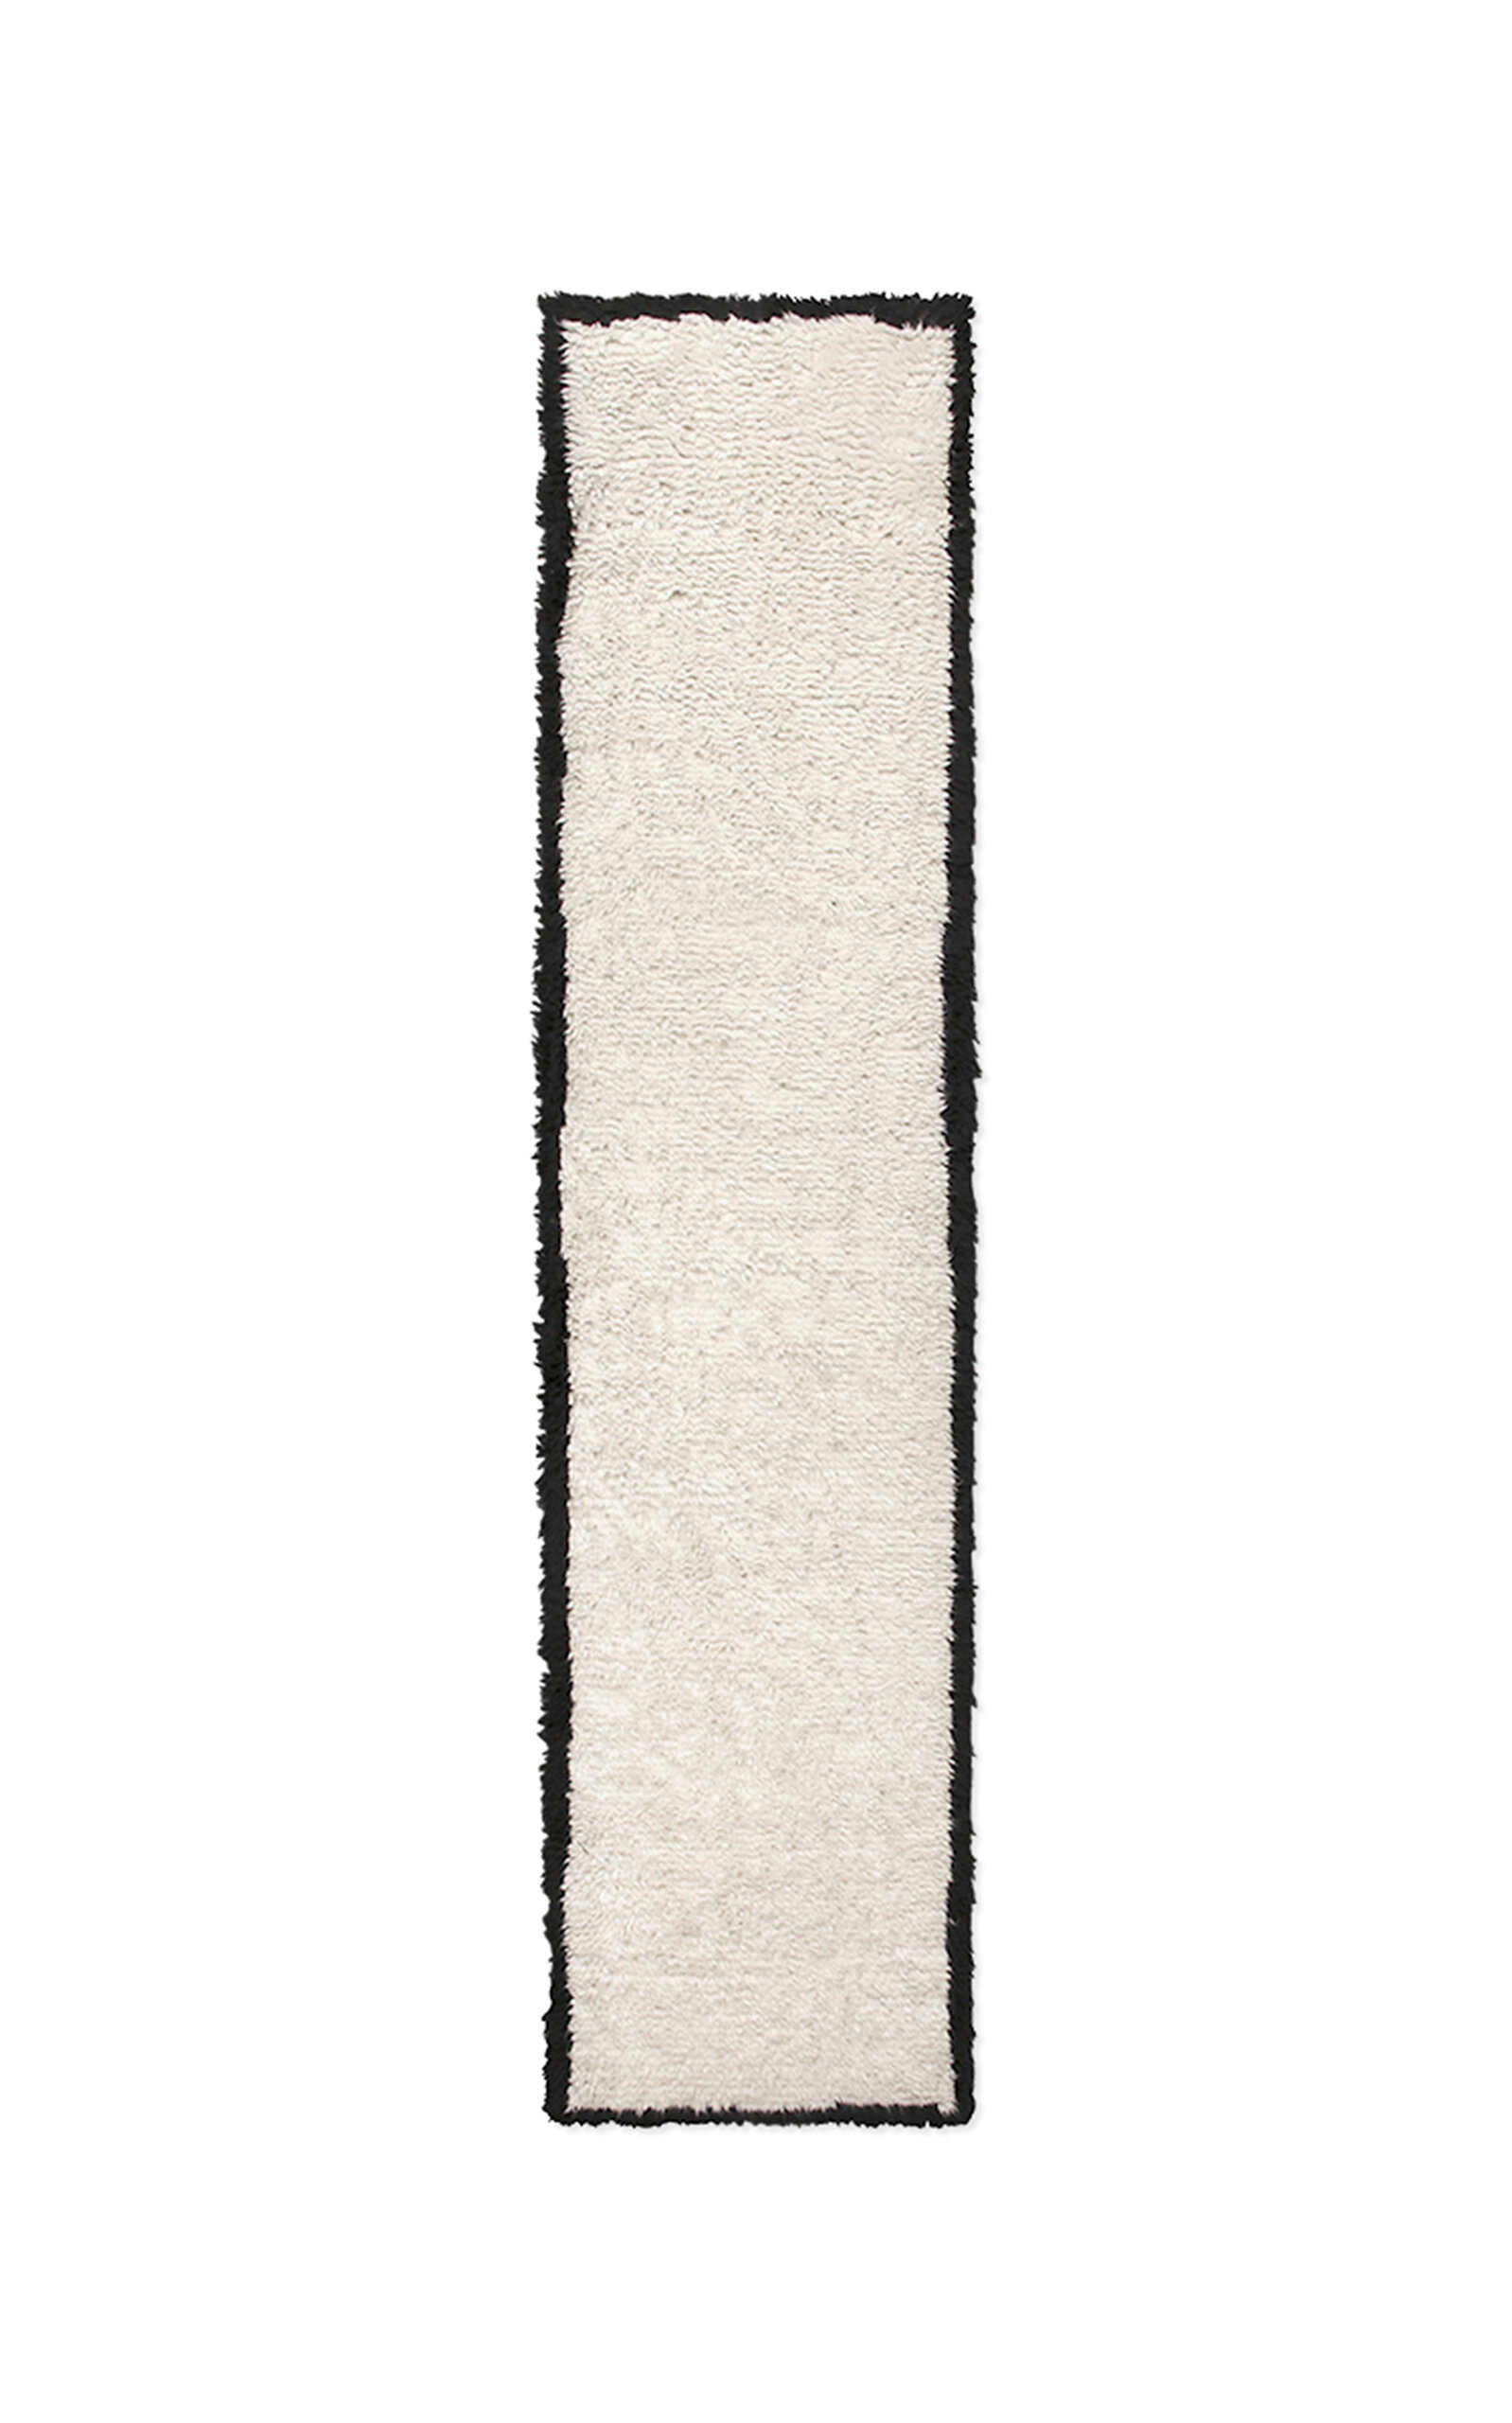 Nordic Knots Shaggy Runner By ; Shaggy Area Rug In Cream/black; Size 2.5' X 12' In Off-white